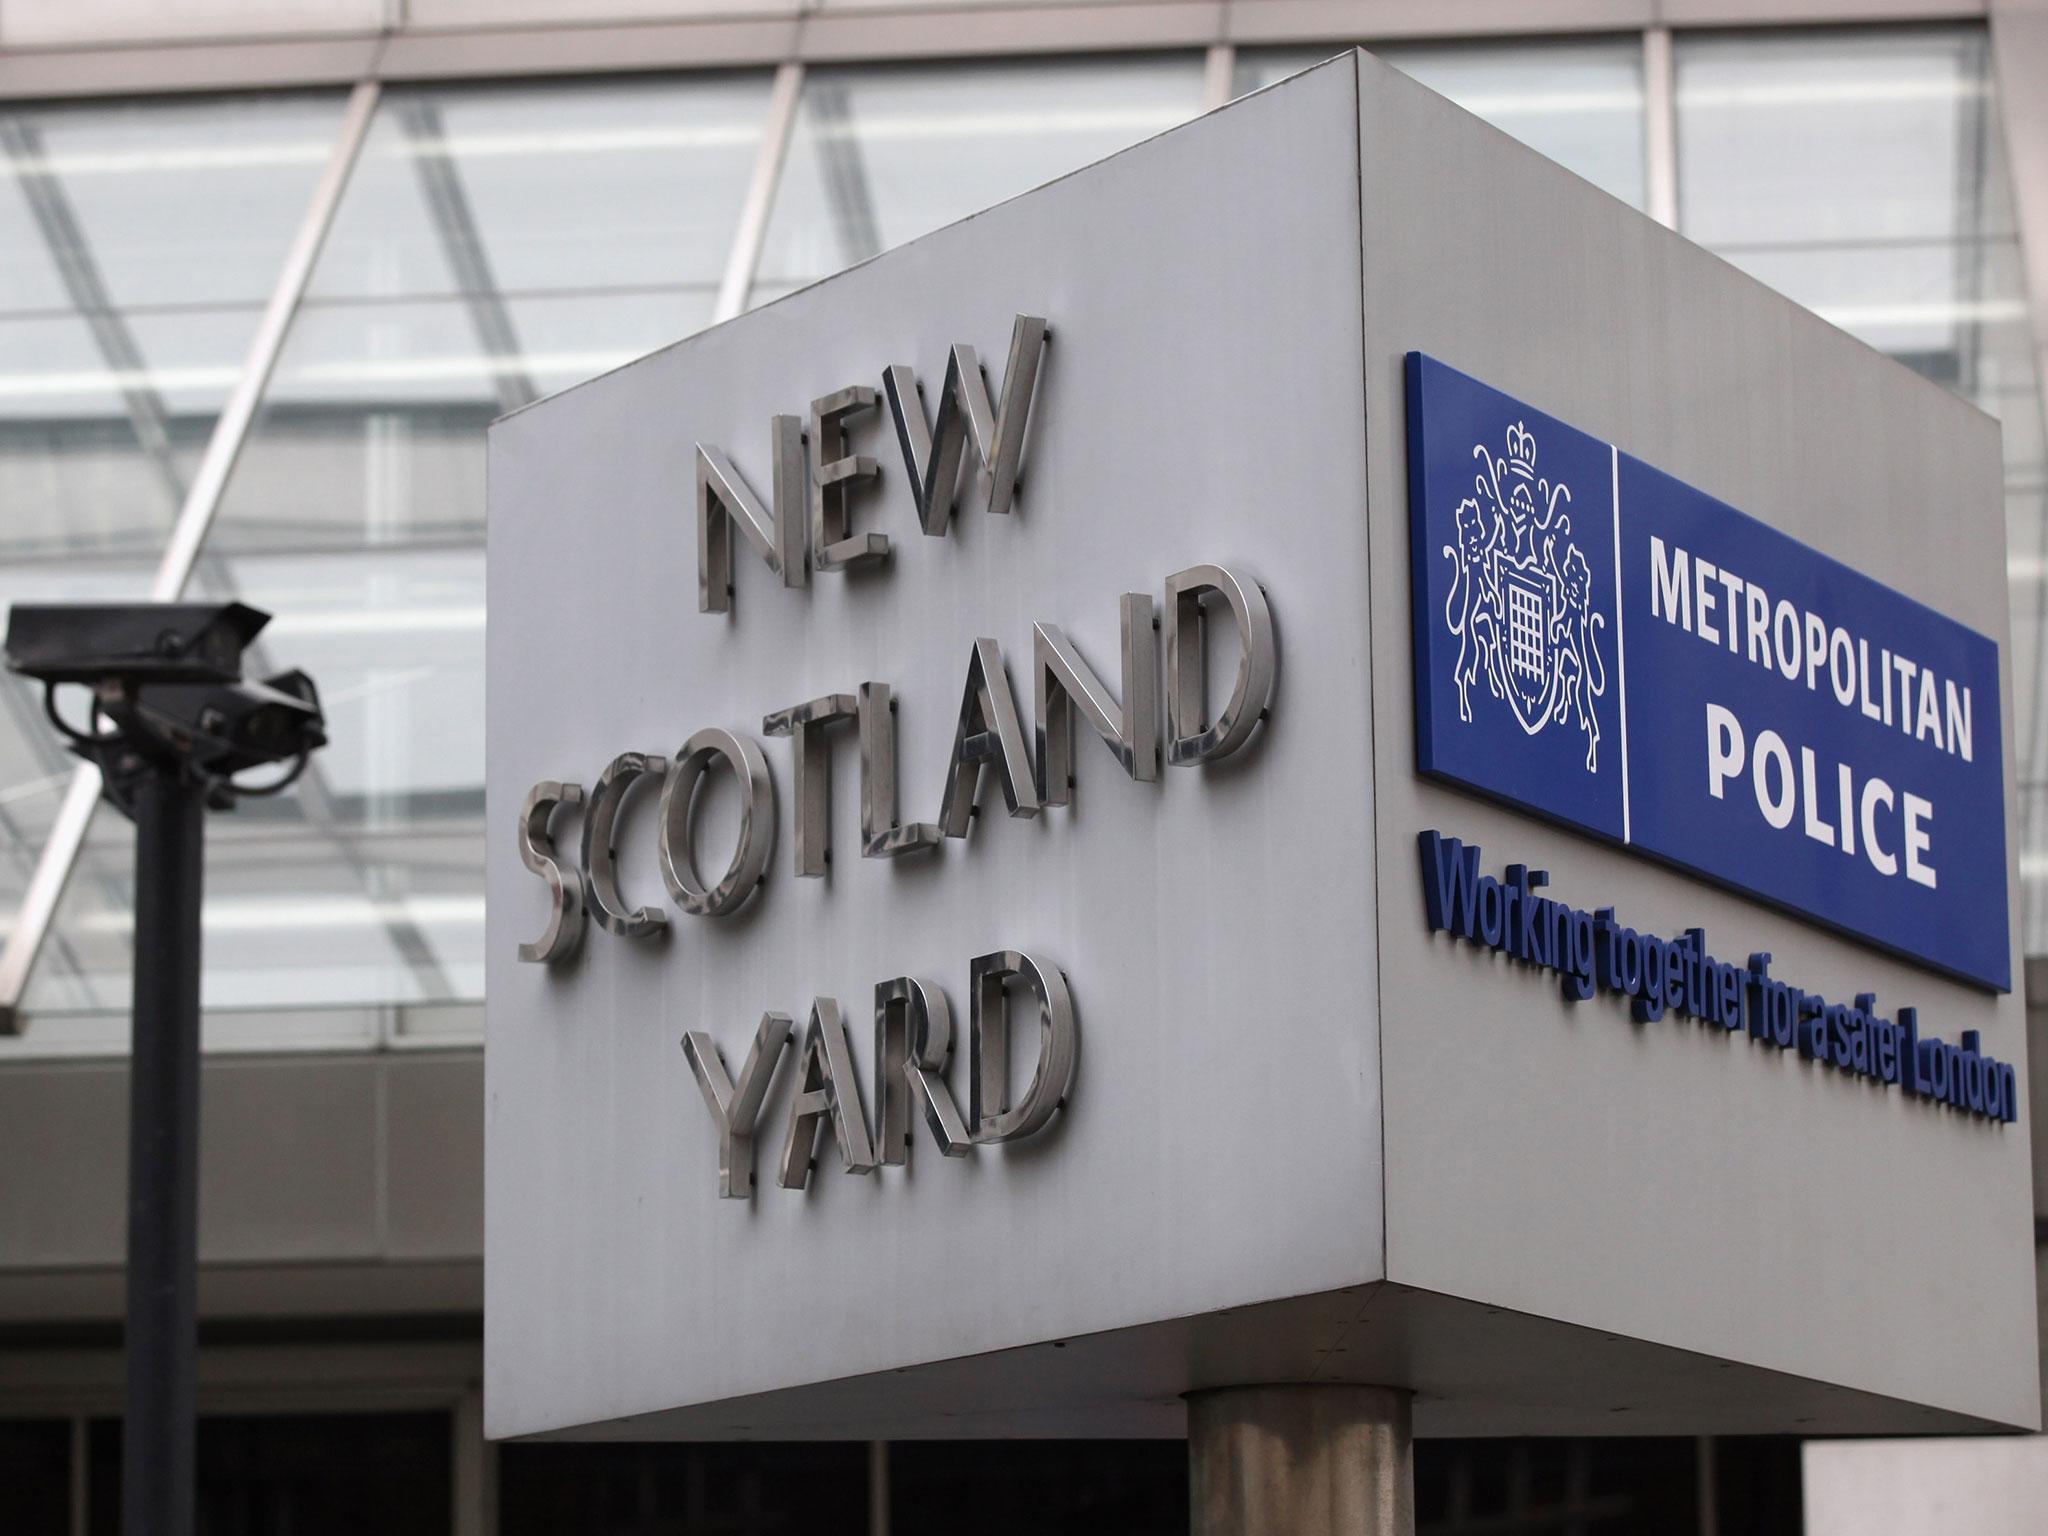 Watchdog also investigated claims Scotland Yard withheld information on Green Party politician Baroness Jenny Jones